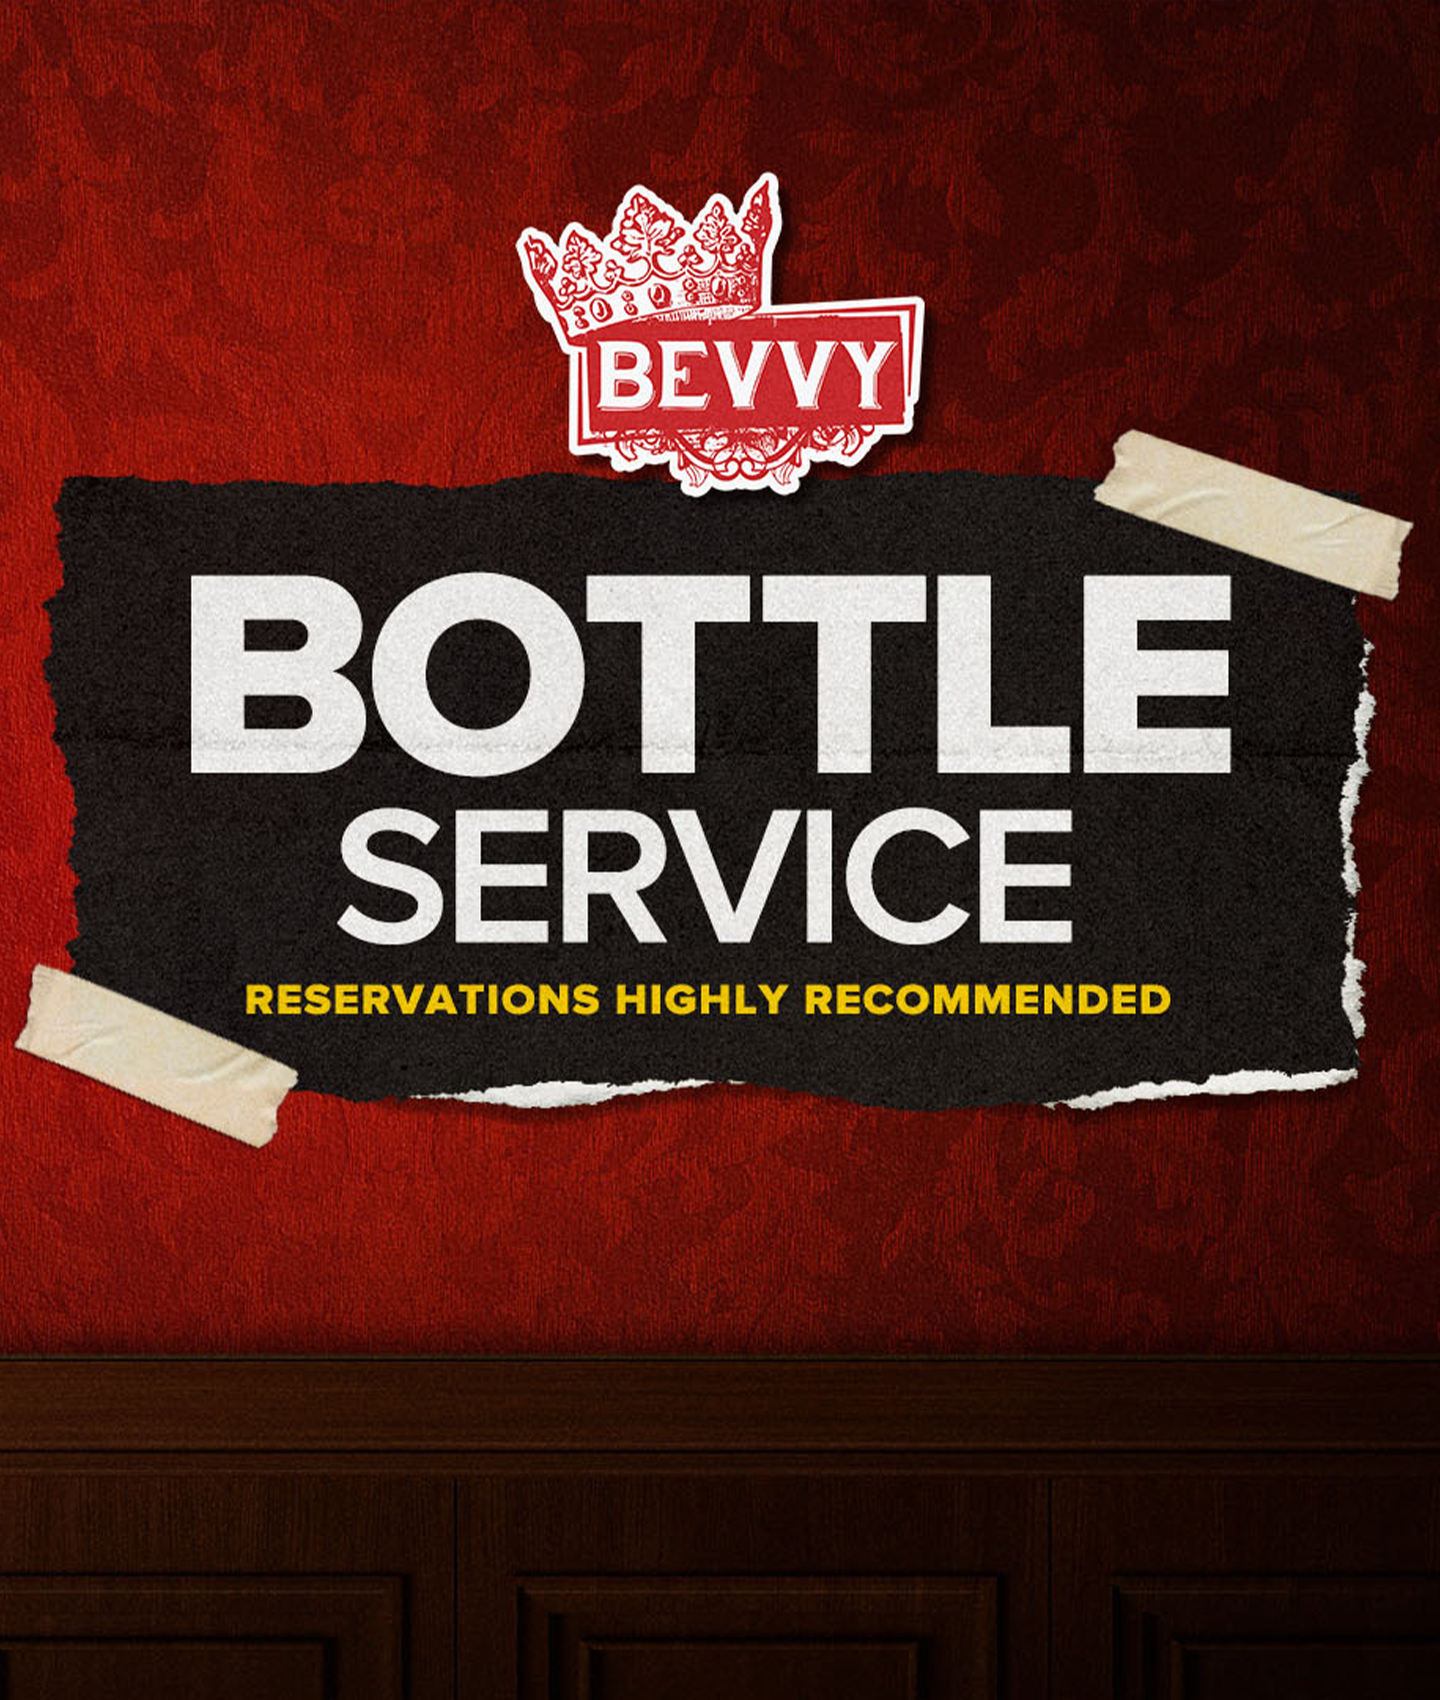 Bevvy Logo and Bold Bottle Service Title. Reservations Highly Recommended. Flanked by Two Women in Lingerie Smiling Toward Camera